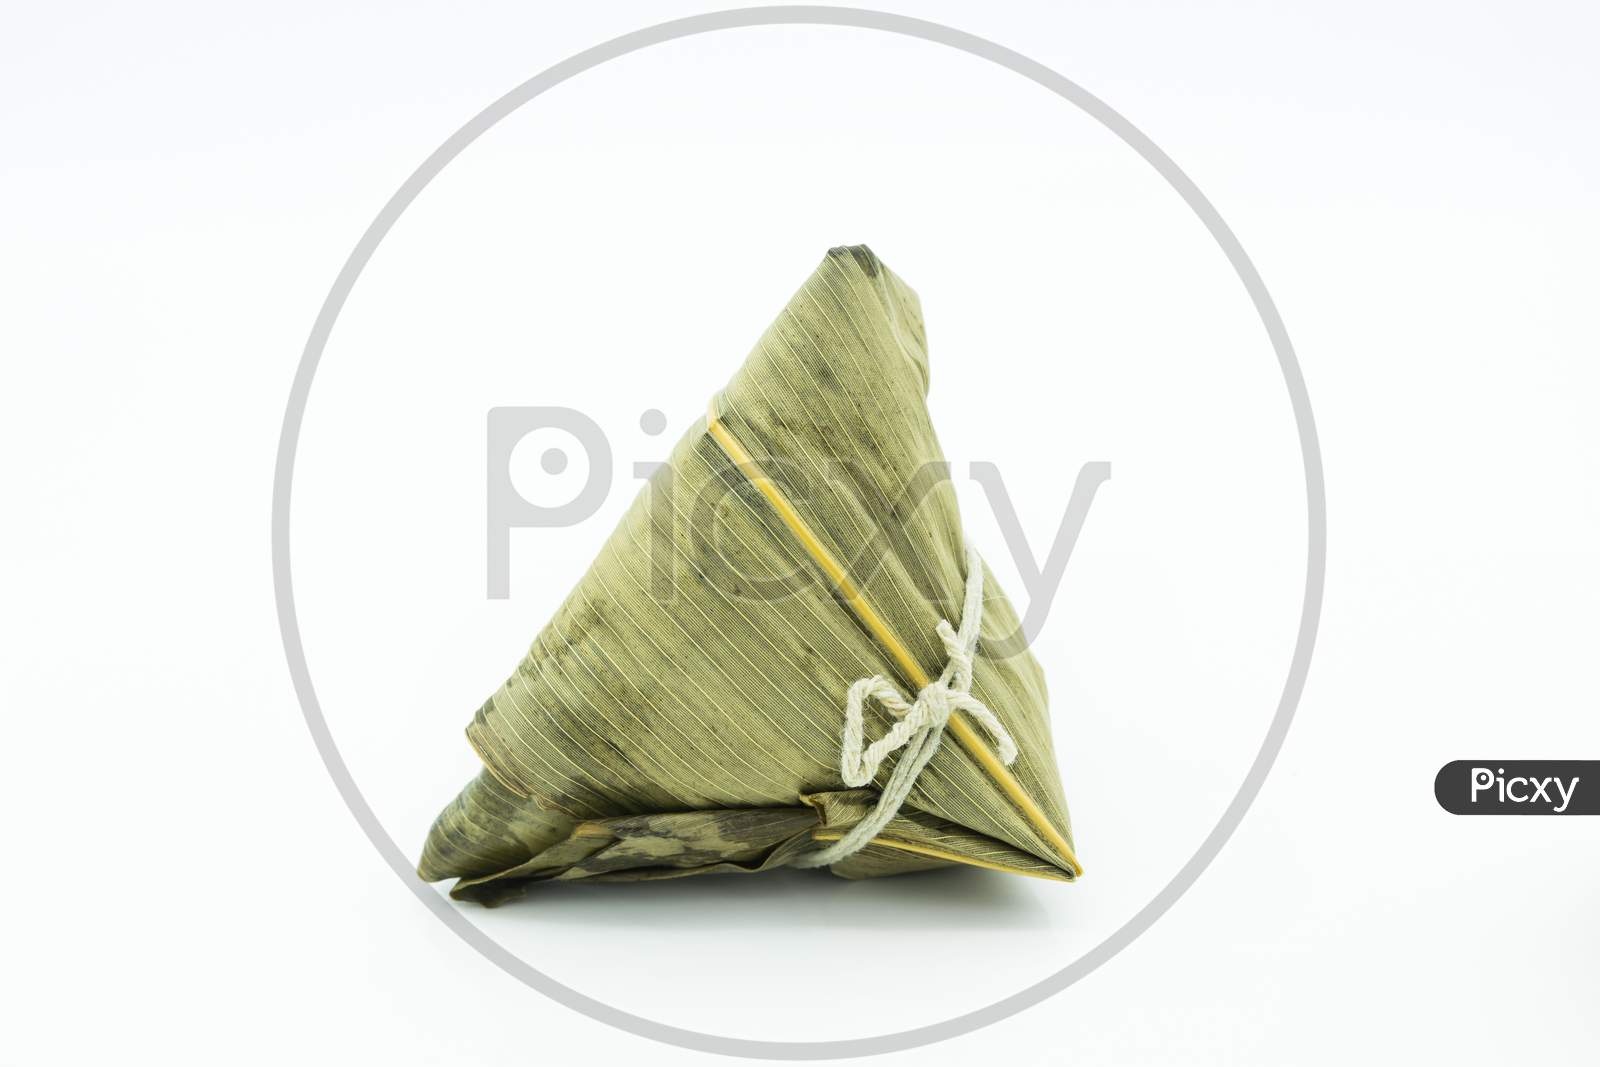 Closeup View Of The Zongzi (Sticky Rice Dumplings), It Is A Traditional Chinese Rice Dish Made Of Glutinous Rice Stuffed With Different Fillings And Wrapped In Reed Leaves.